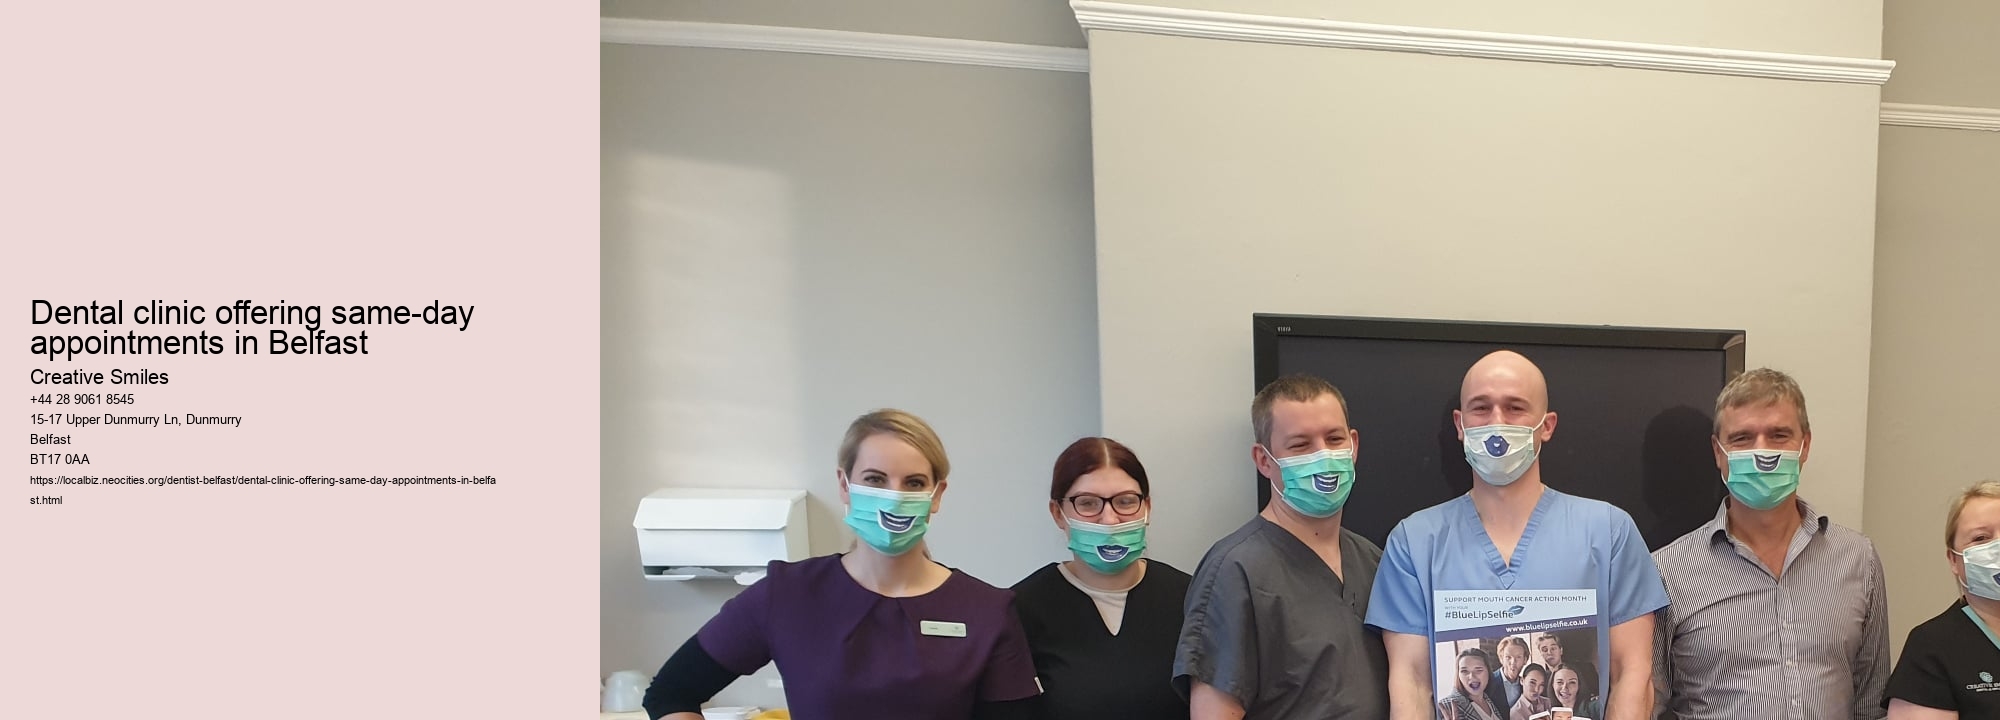 Dental clinic offering same-day appointments in Belfast